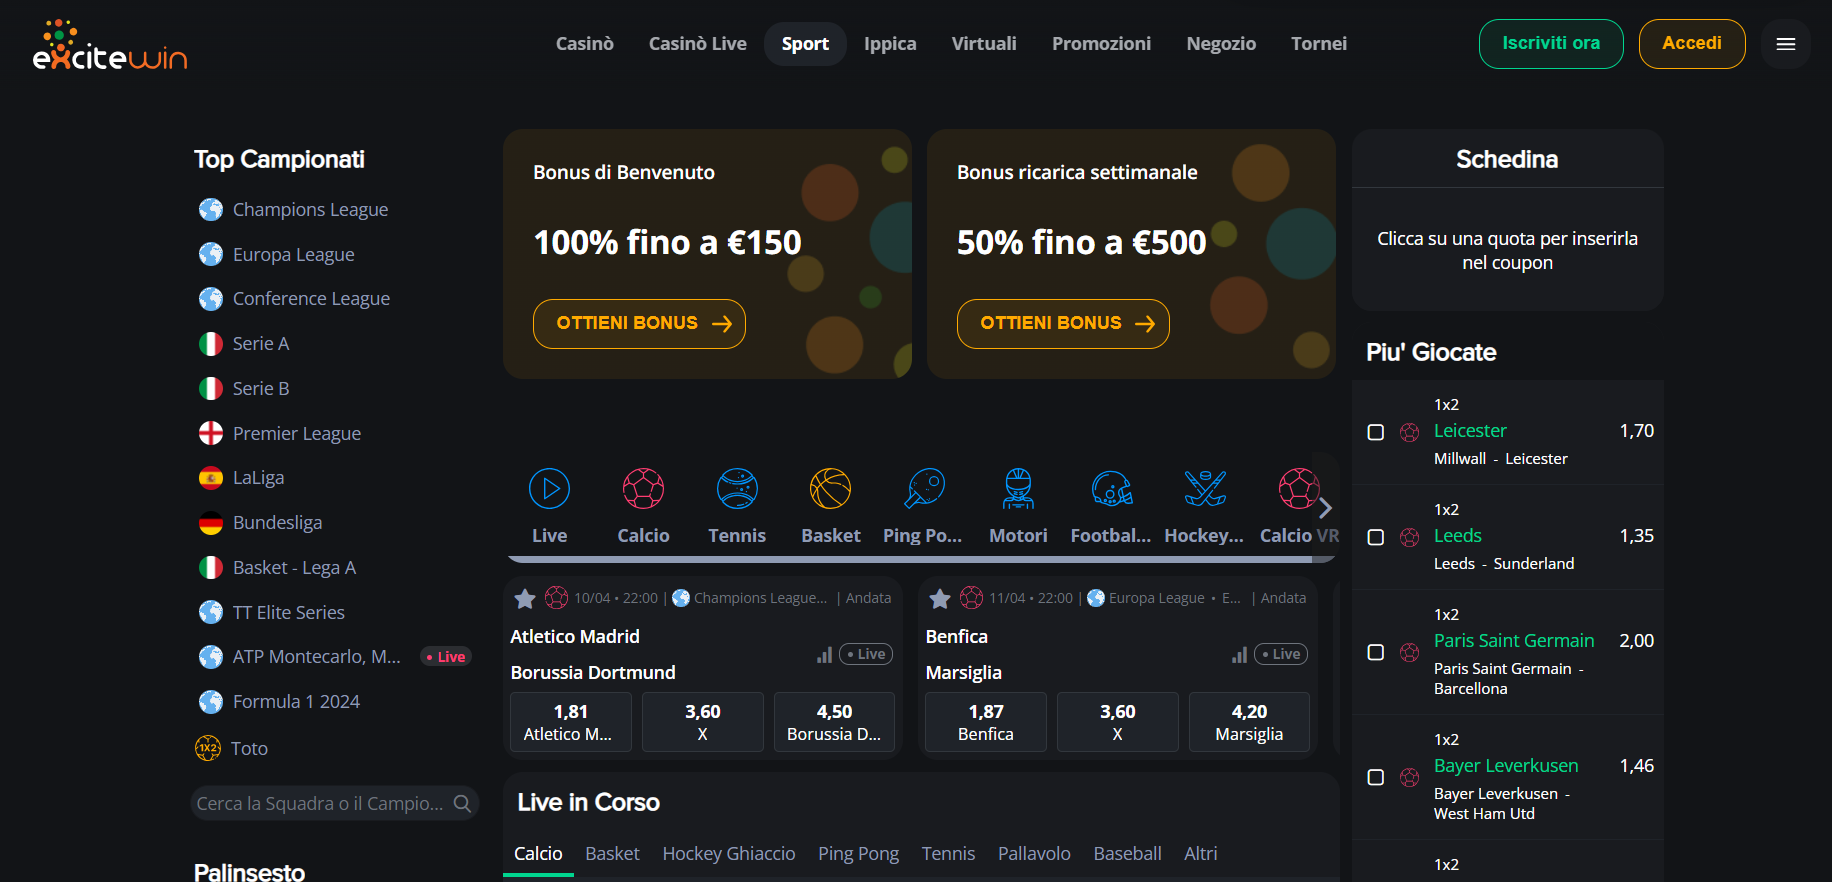 Excitewin Casino Scommesse Sportive